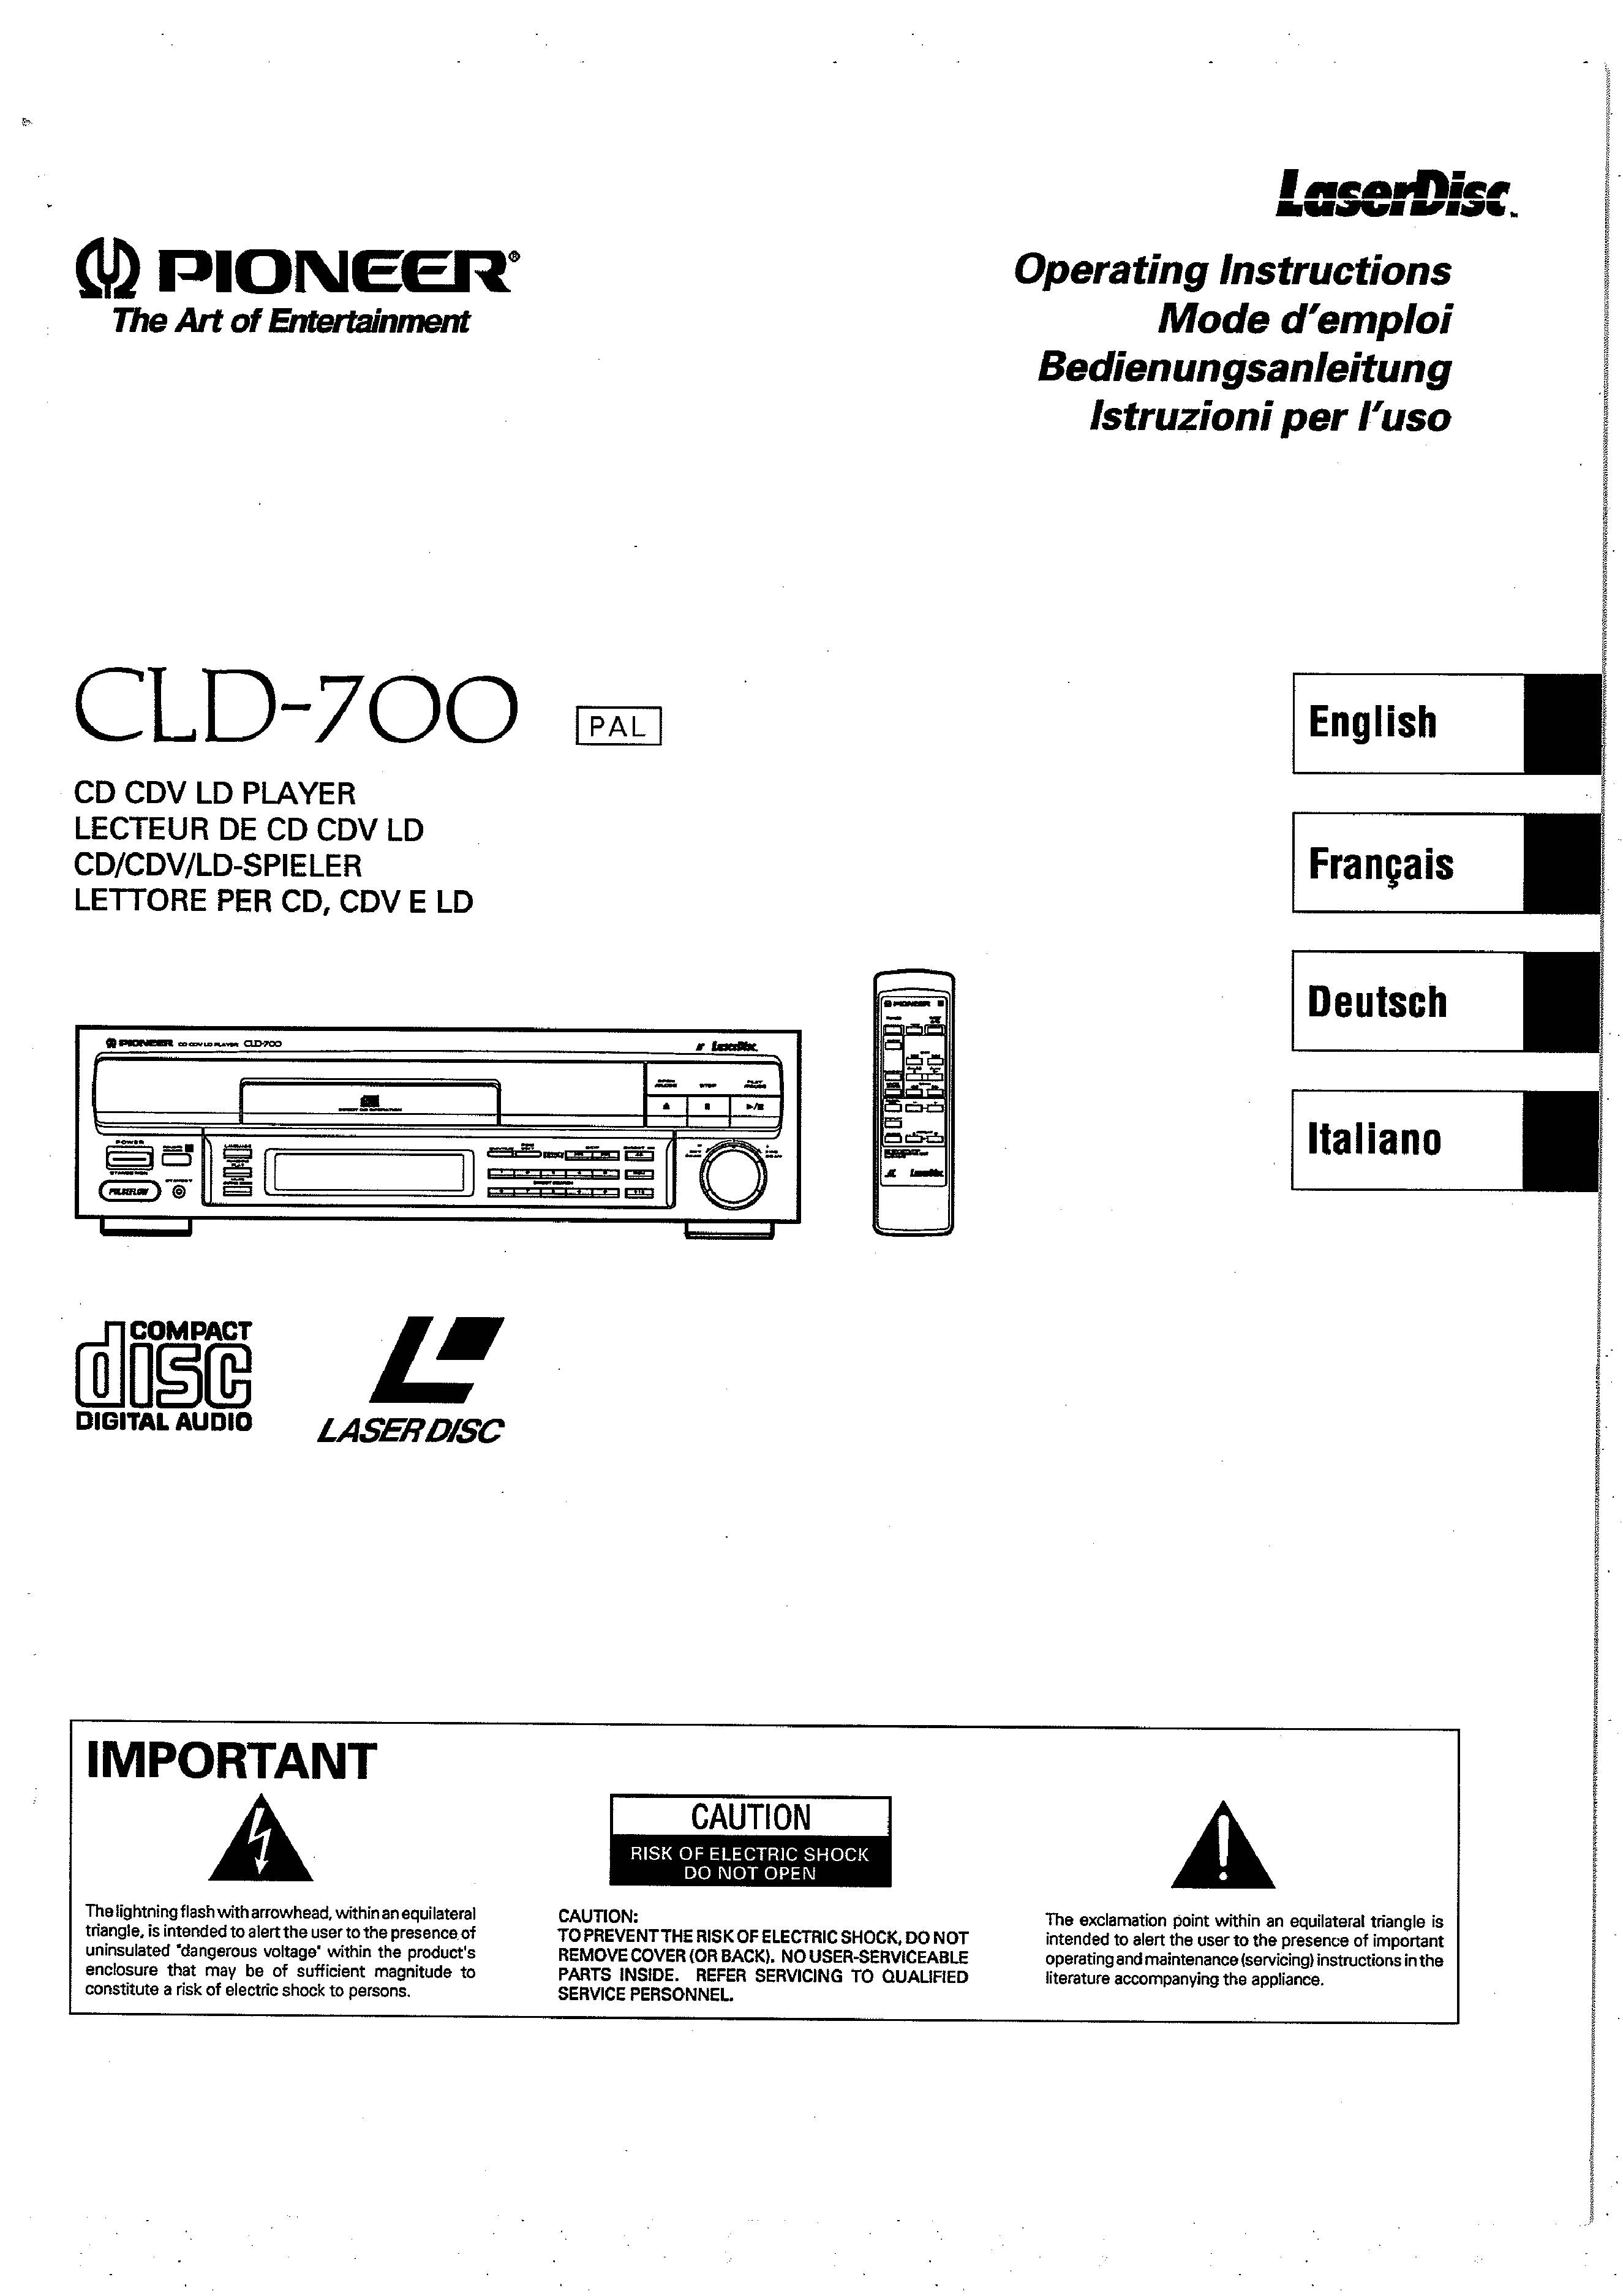 Pioneer CLD-700